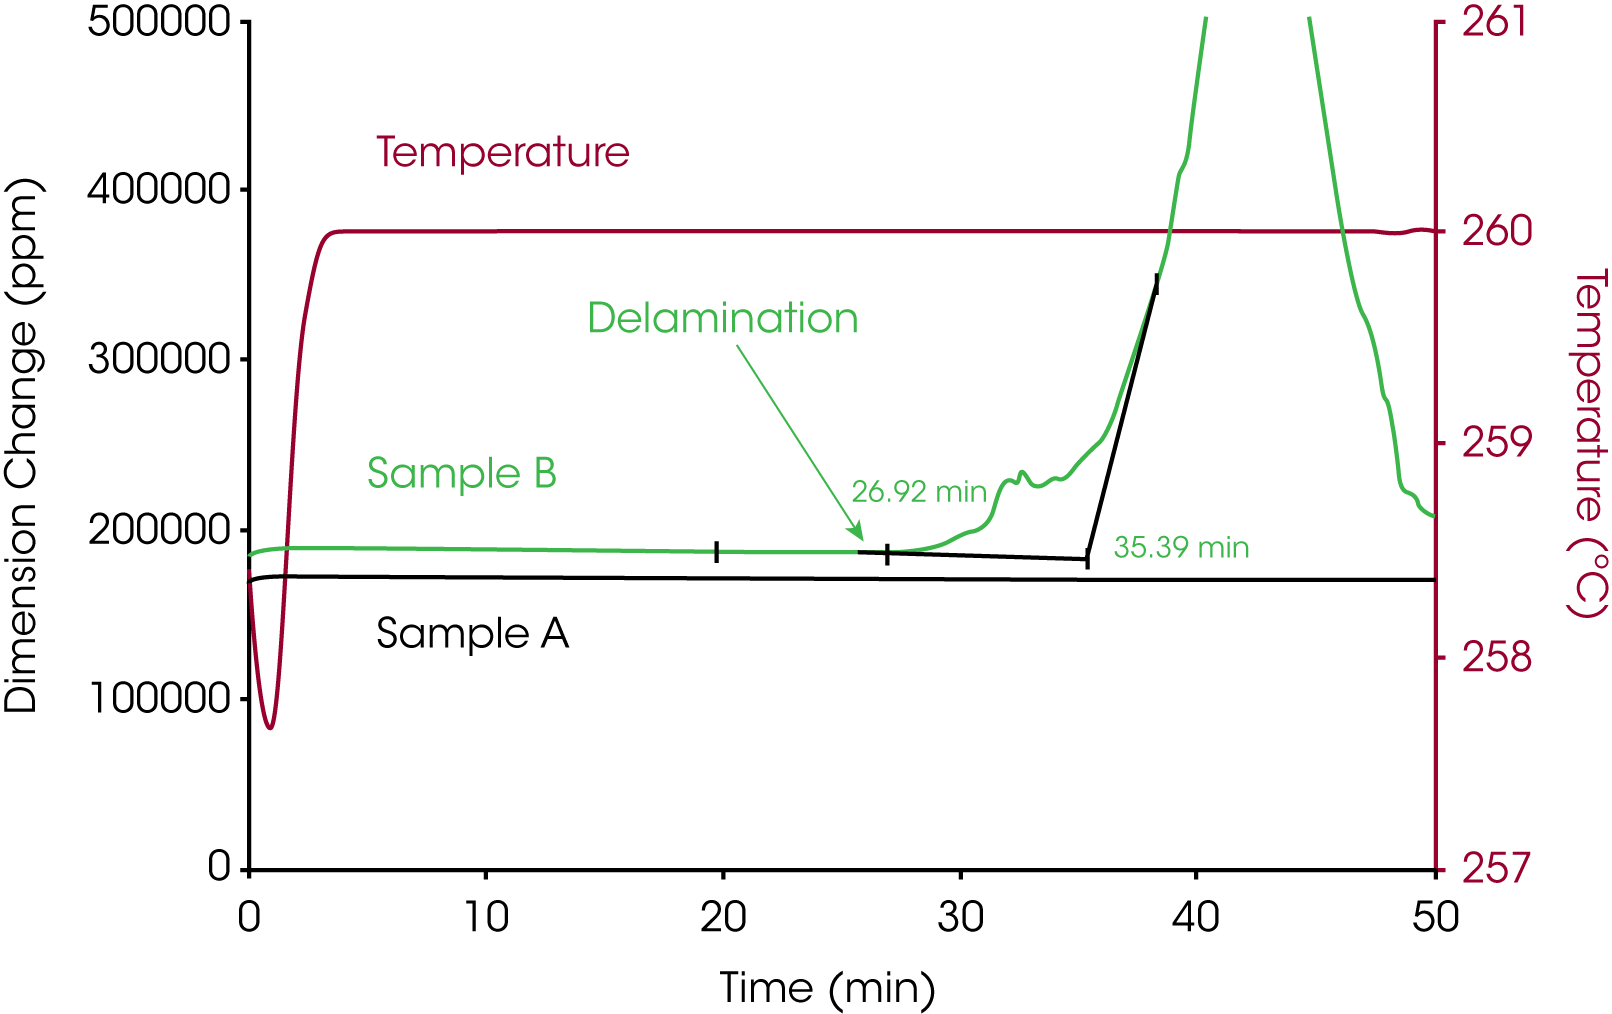 Figure 3. A Comparison of the Thermal Stability of Two Samples During Zone 3